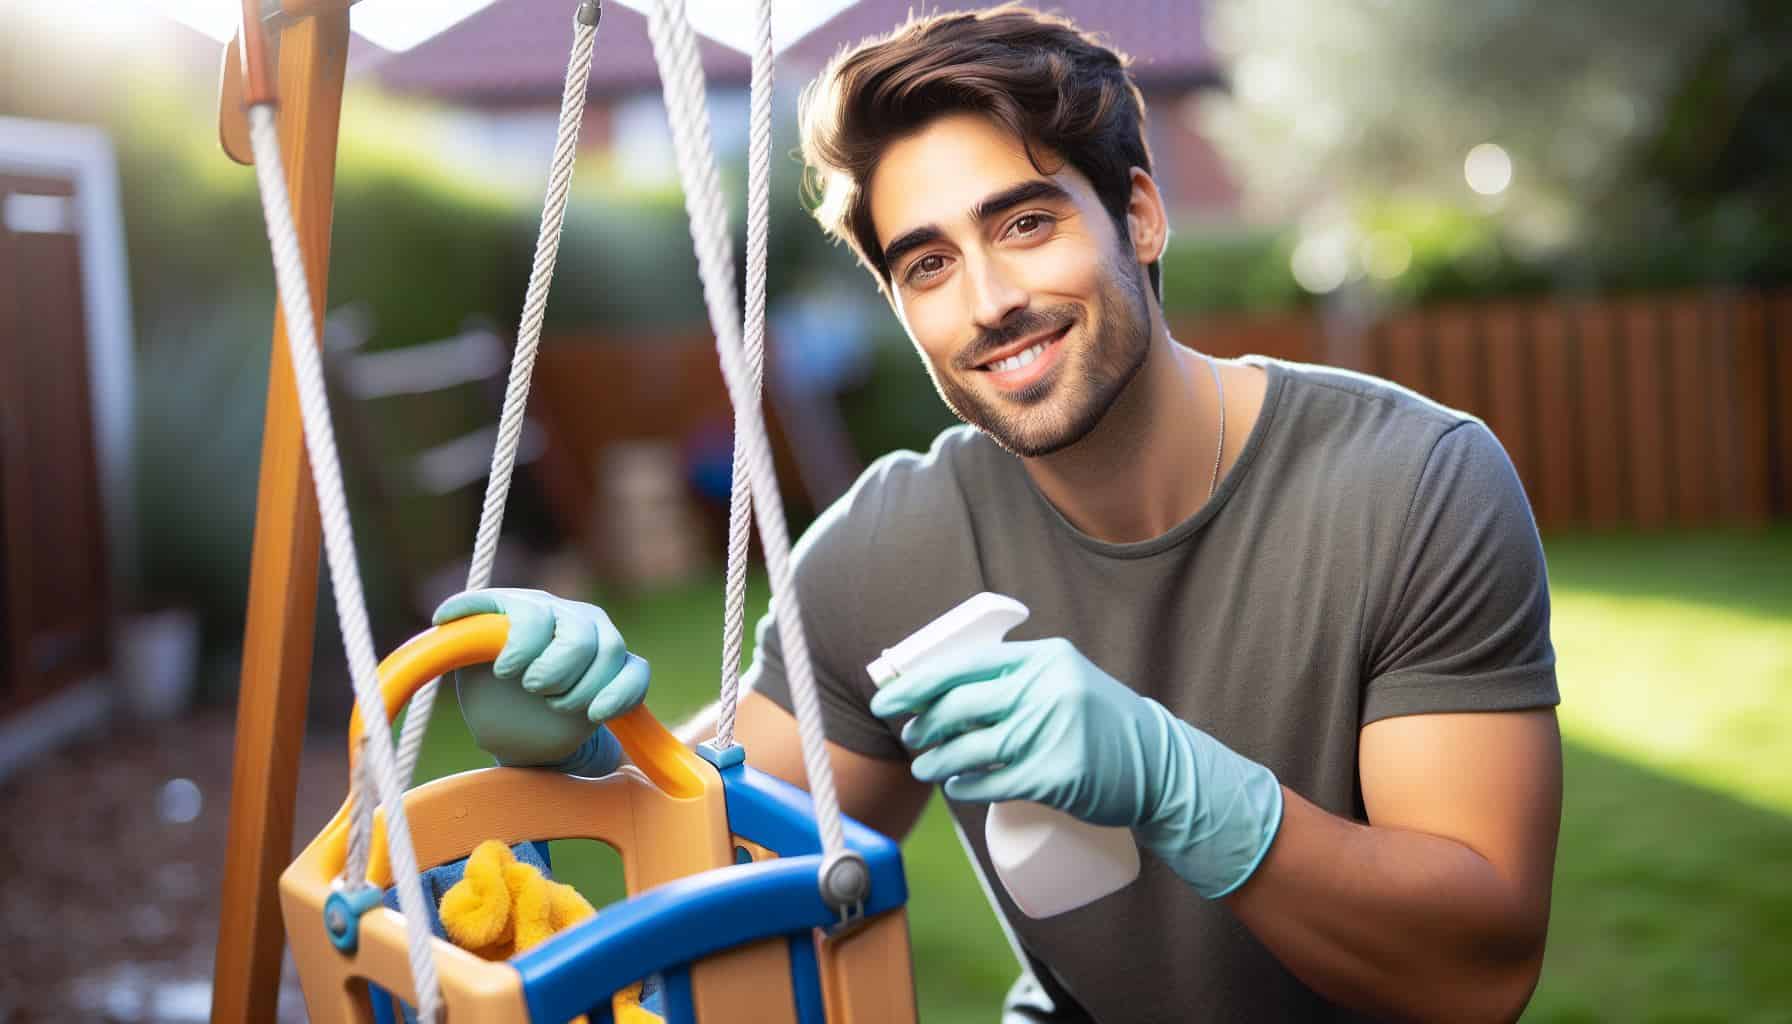 Man cleaning an outdoor baby swing